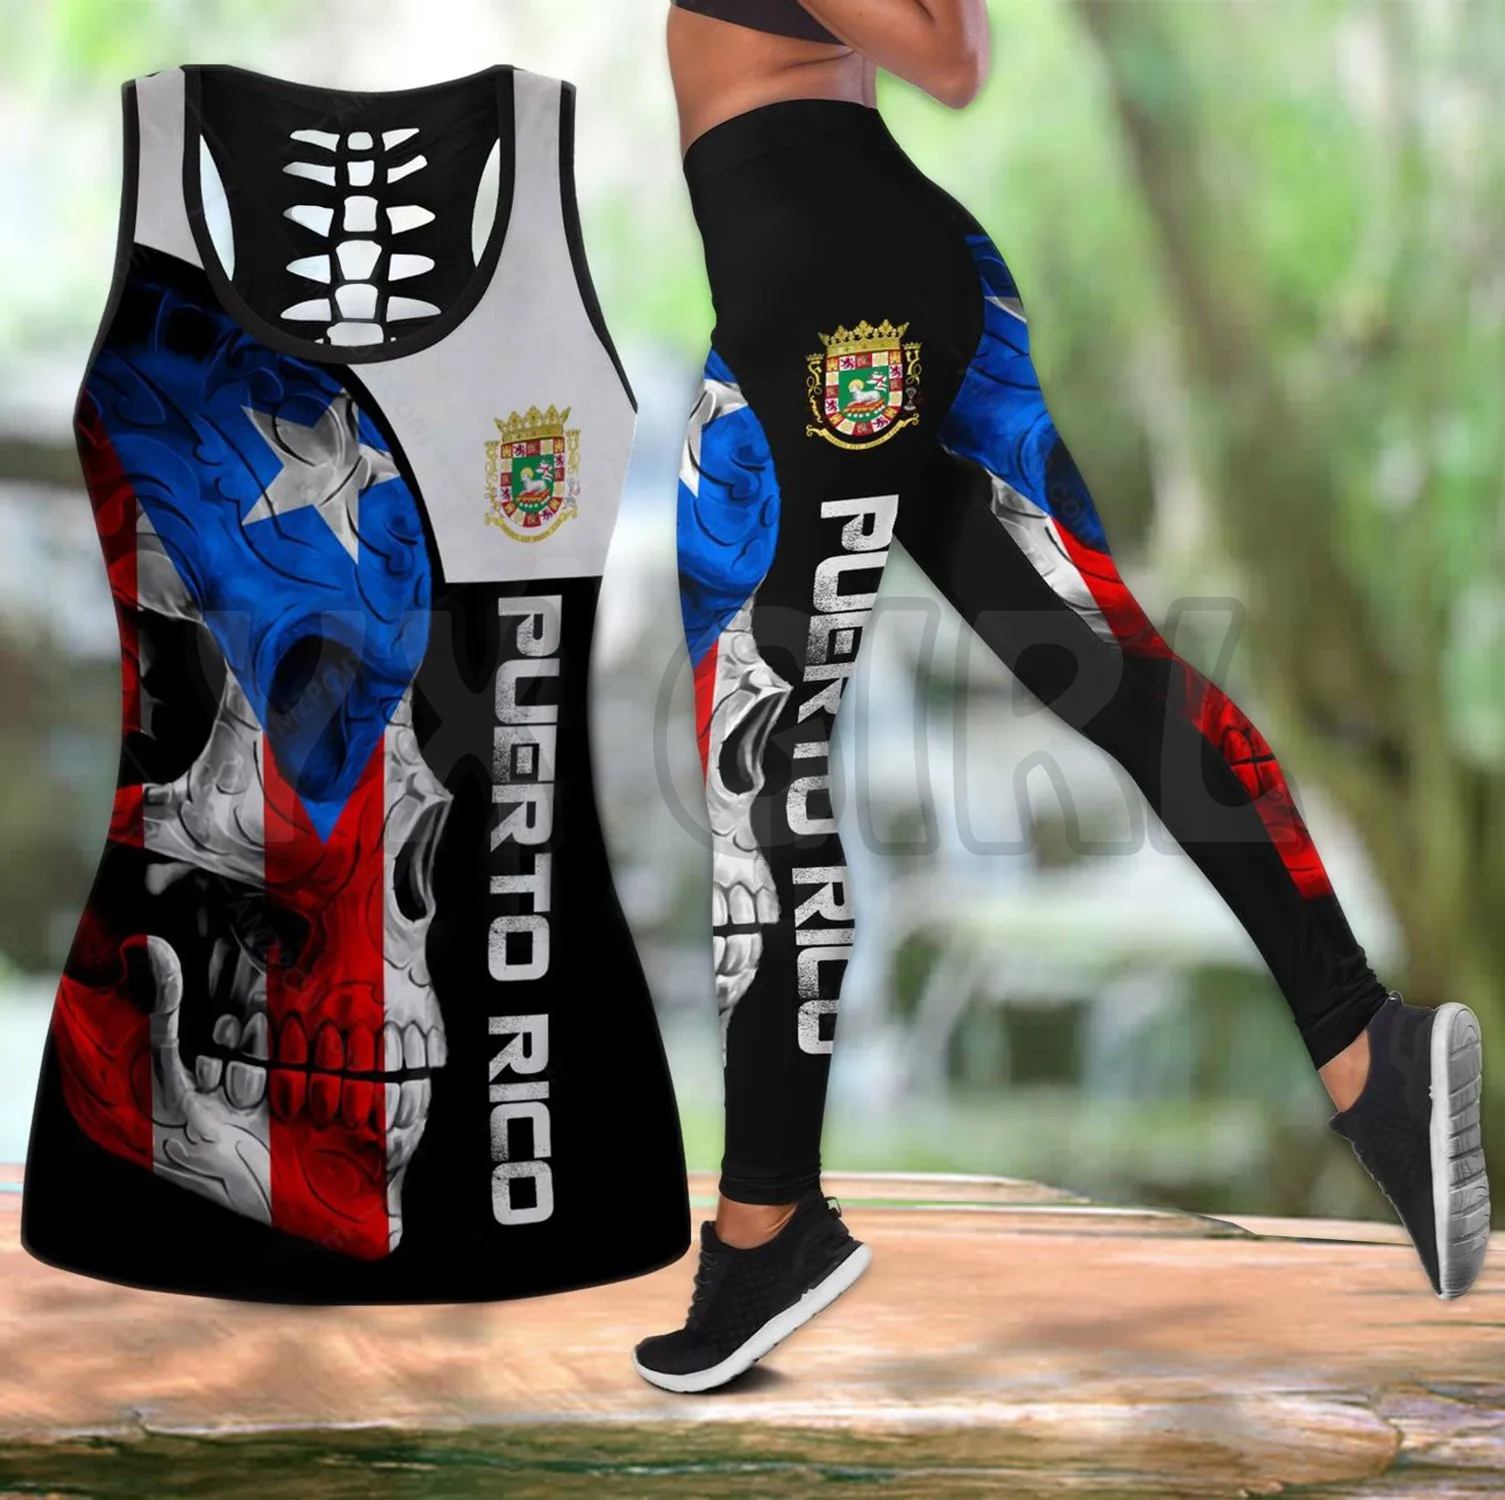 Puerto Rico With Skull 3D Printed Tank Top+Legging Combo Outfit Yoga Fitness Legging Women